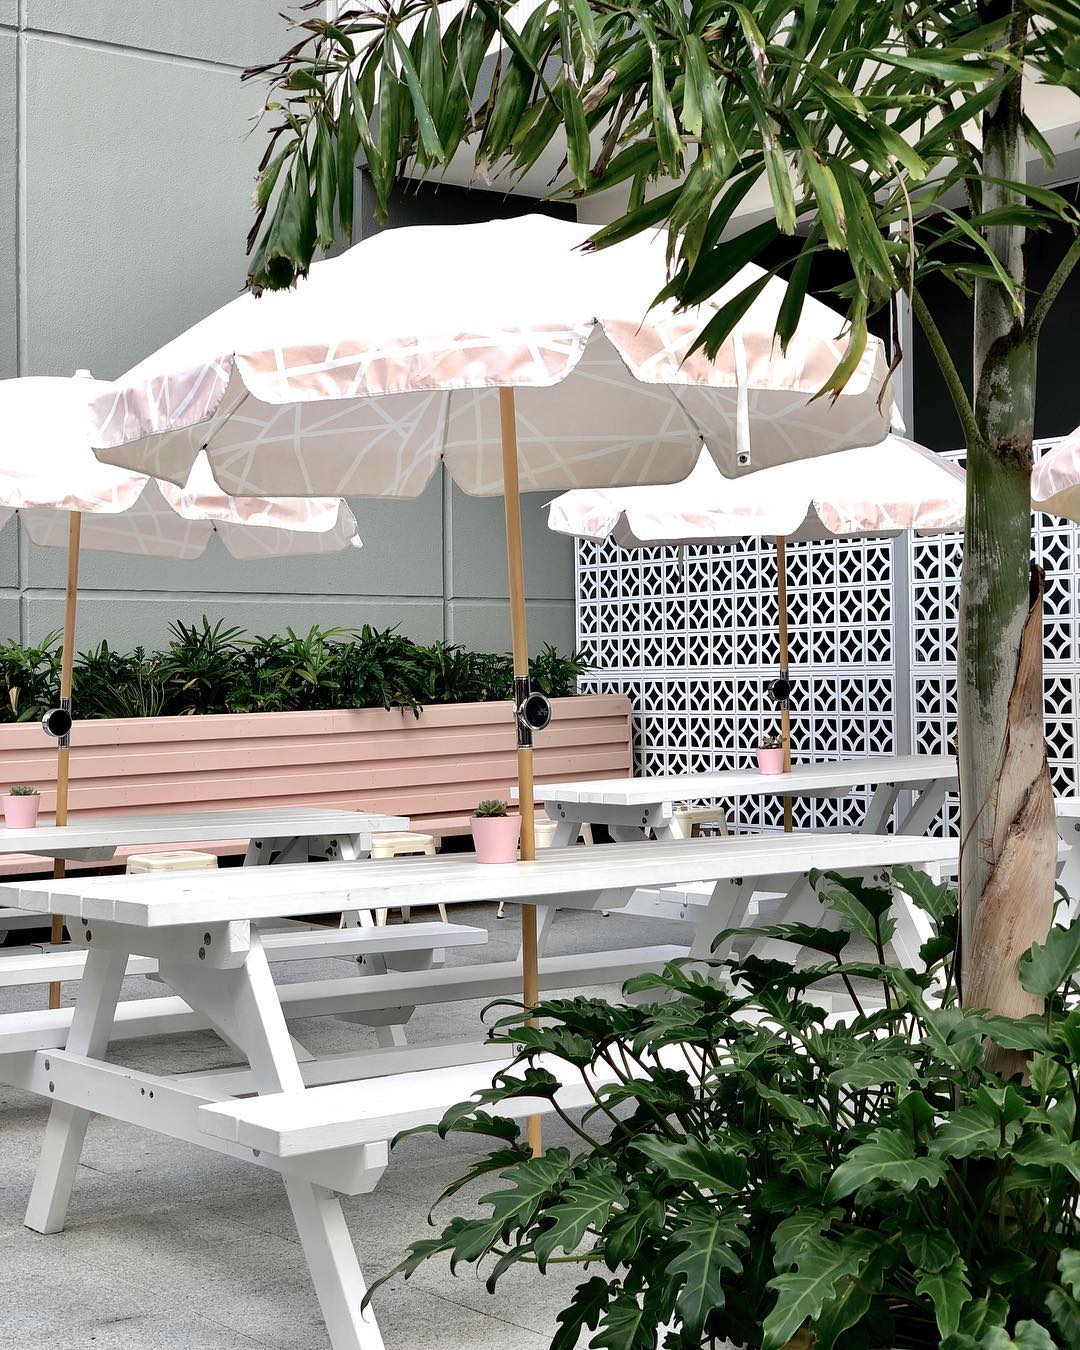 white picnic tables under pink striped umbrellas in a courtyard